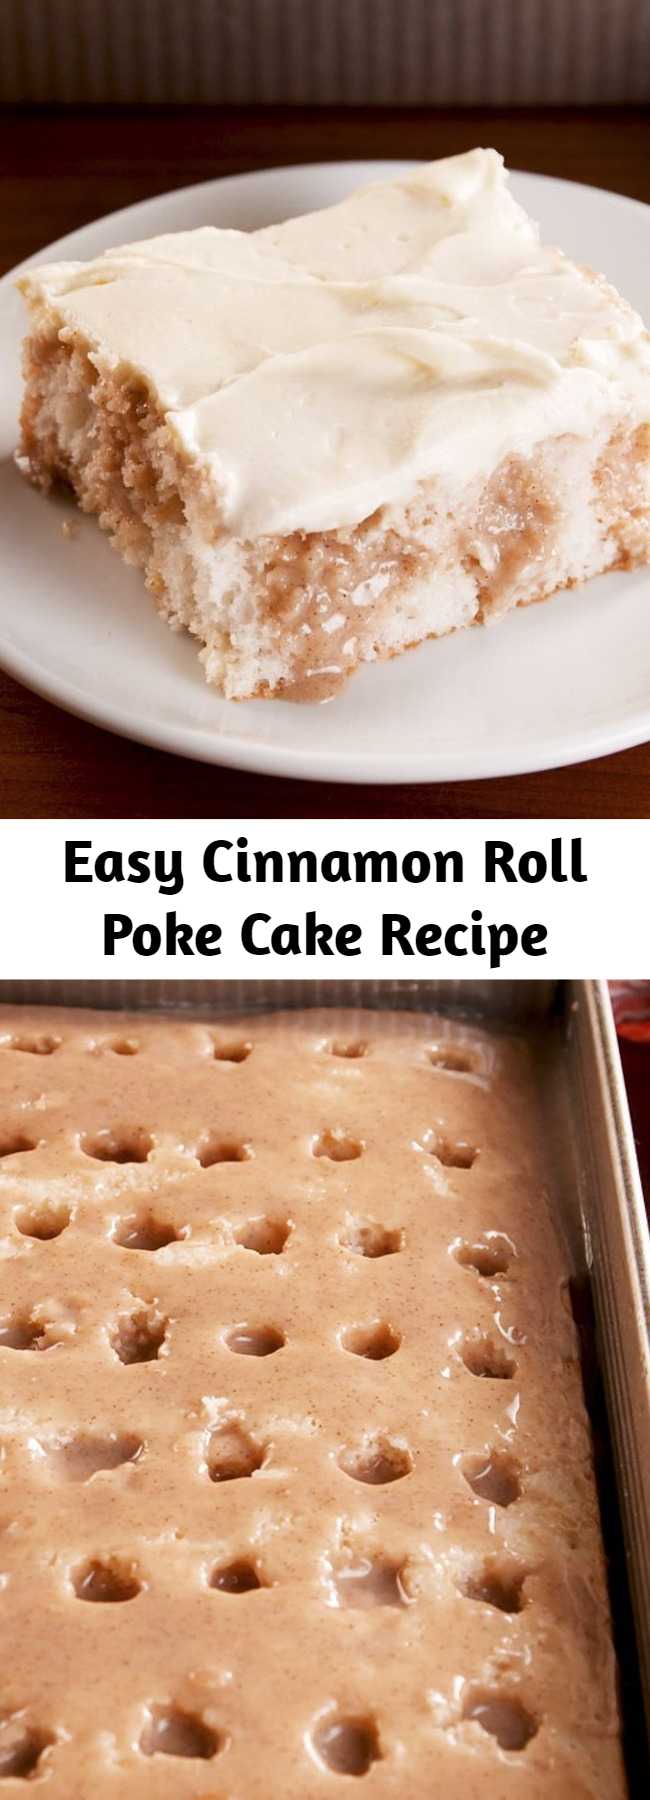 Easy Cinnamon Roll Poke Cake Recipe - Pull out this Cinnamon Roll Poke Cake at the end of the meal, and you'll be the most popular person in the room. It has everything you love about cinnamon rolls, even the cream cheese frosting! It's extremely decadent and exactly what we are craving at every moment of the day. #easy #recipe #cinnamonroll #pokecake #cinnamonrollpokecake #cakes #easydesserts